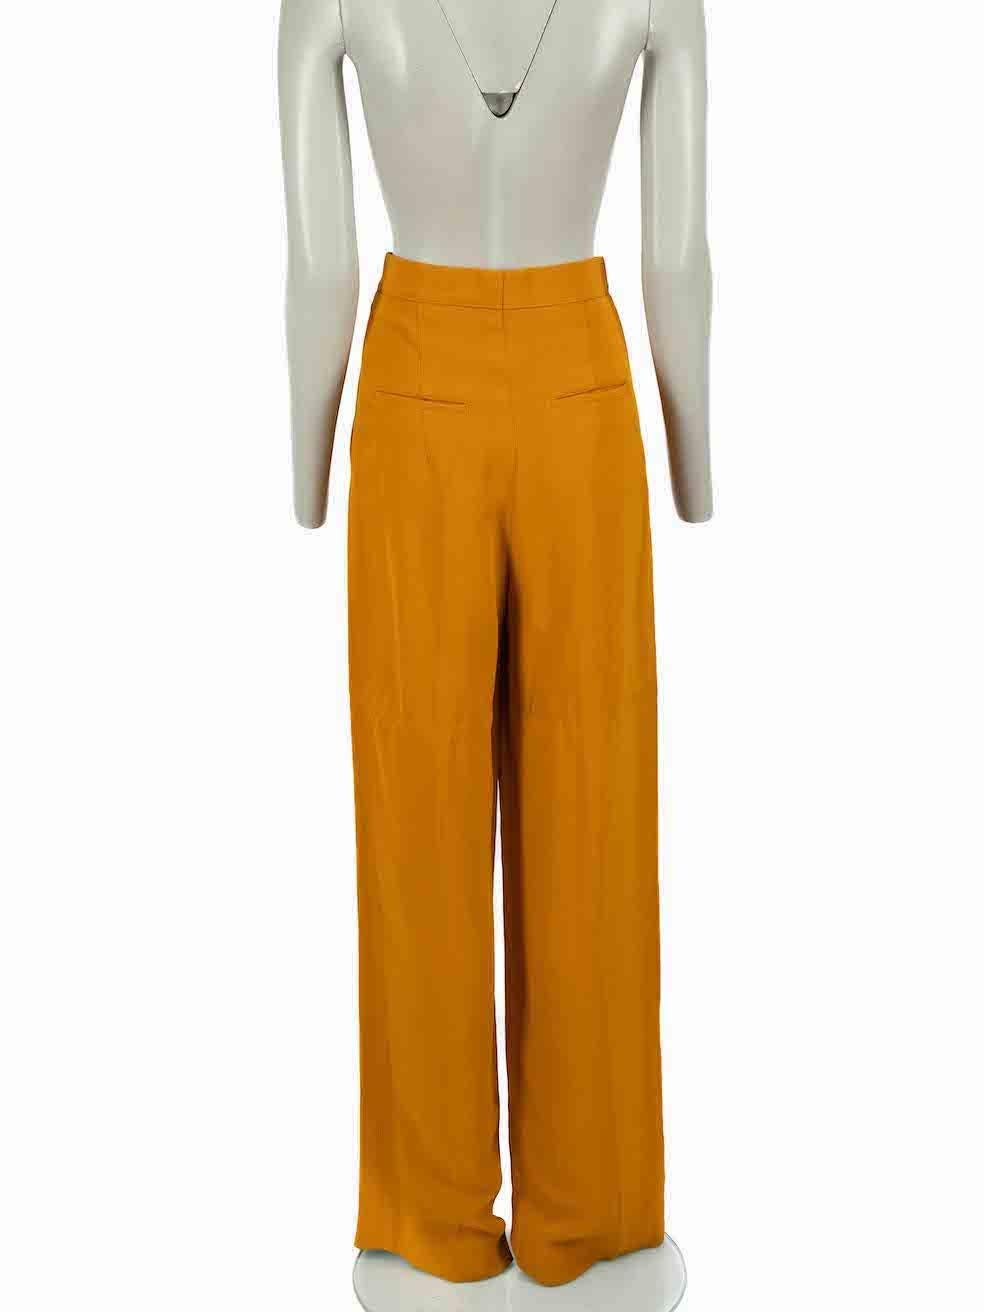 Céline Mustard Pleat Detail High Waisted Trousers Size S In New Condition For Sale In London, GB